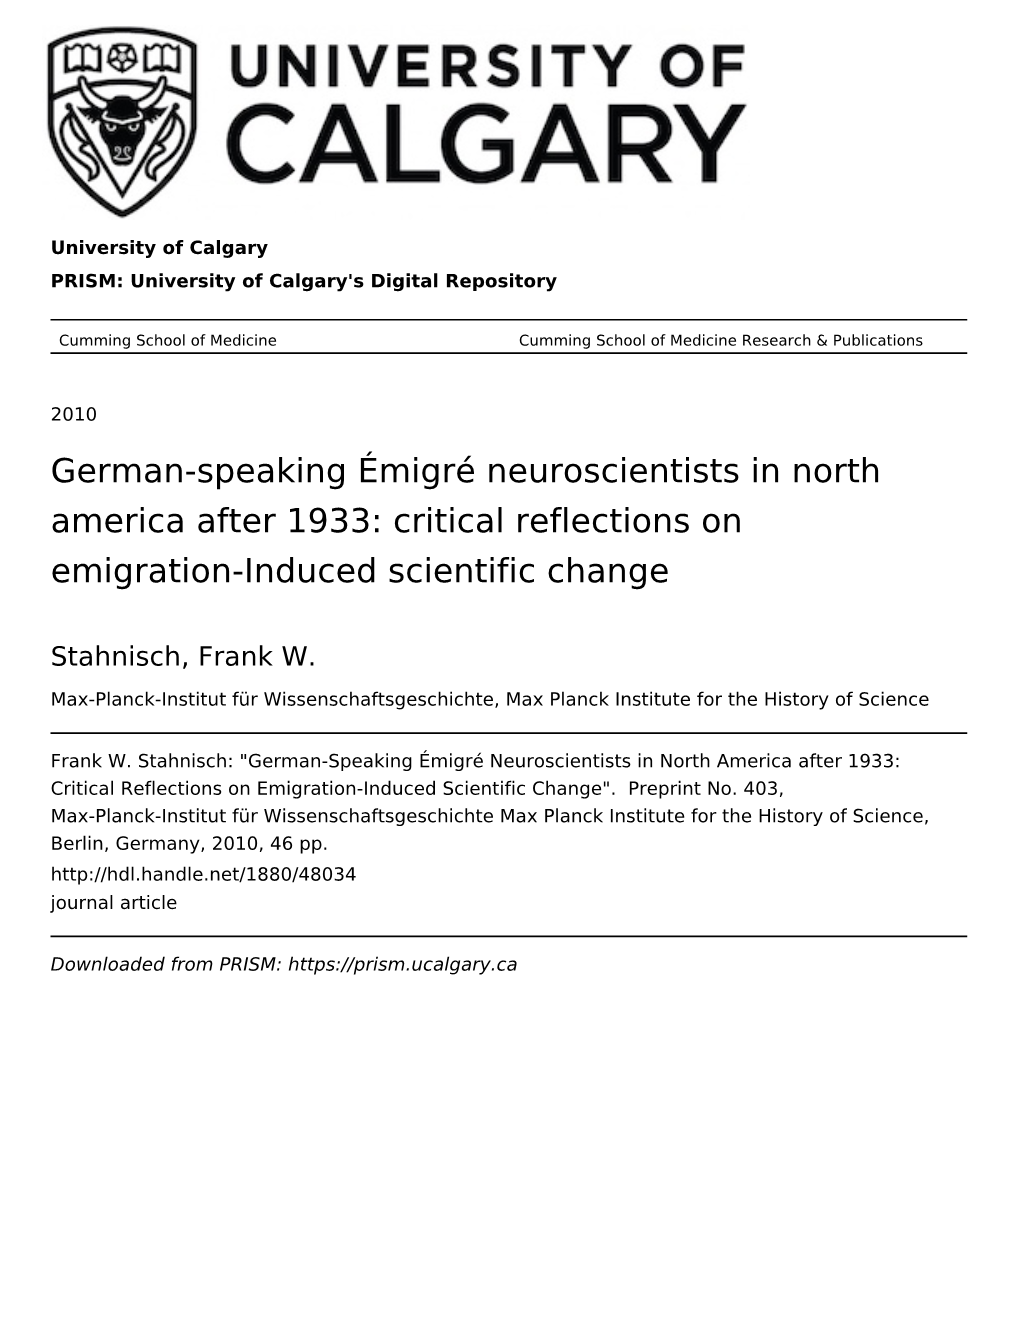 German-Speaking Émigré Neuroscientists in North America After 1933: Critical Reflections on Emigration-Induced Scientific Change